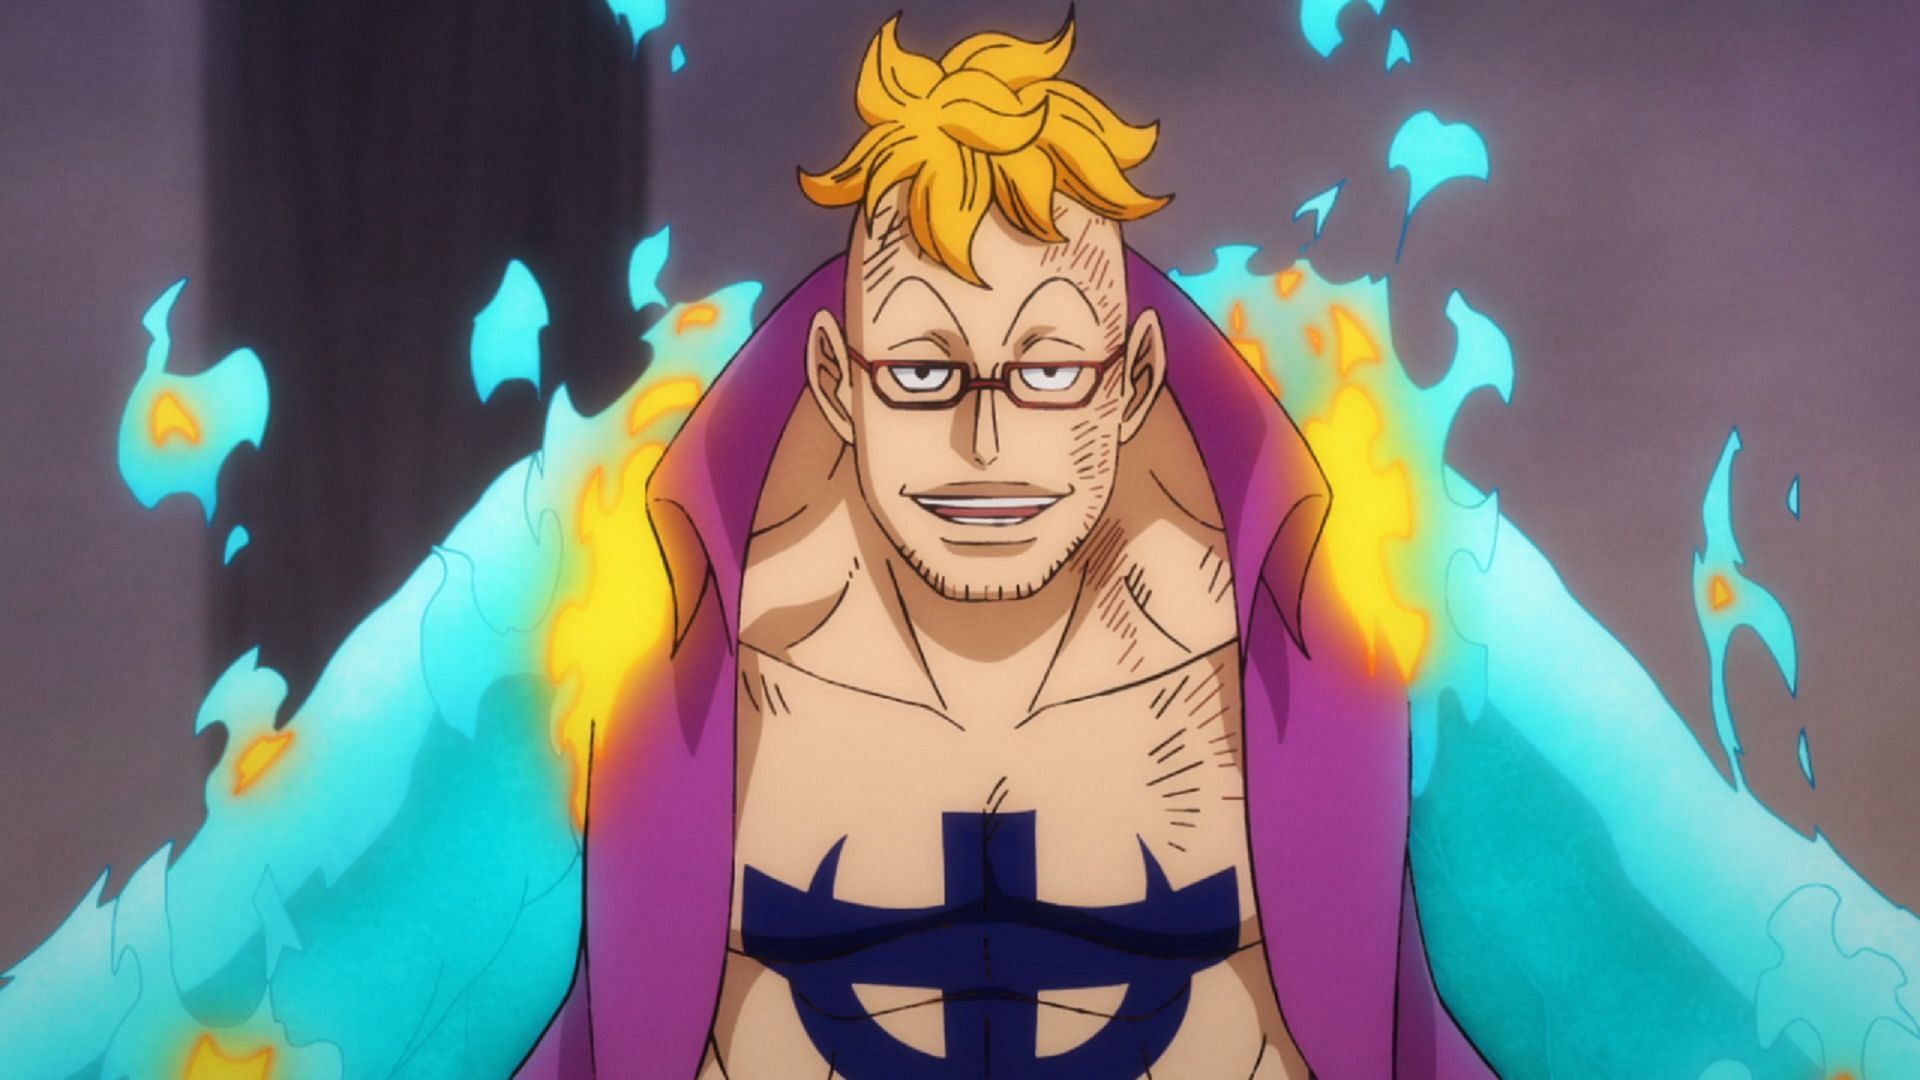 Marco as seen in One Piece (Image via Toei Animation, One Piece)